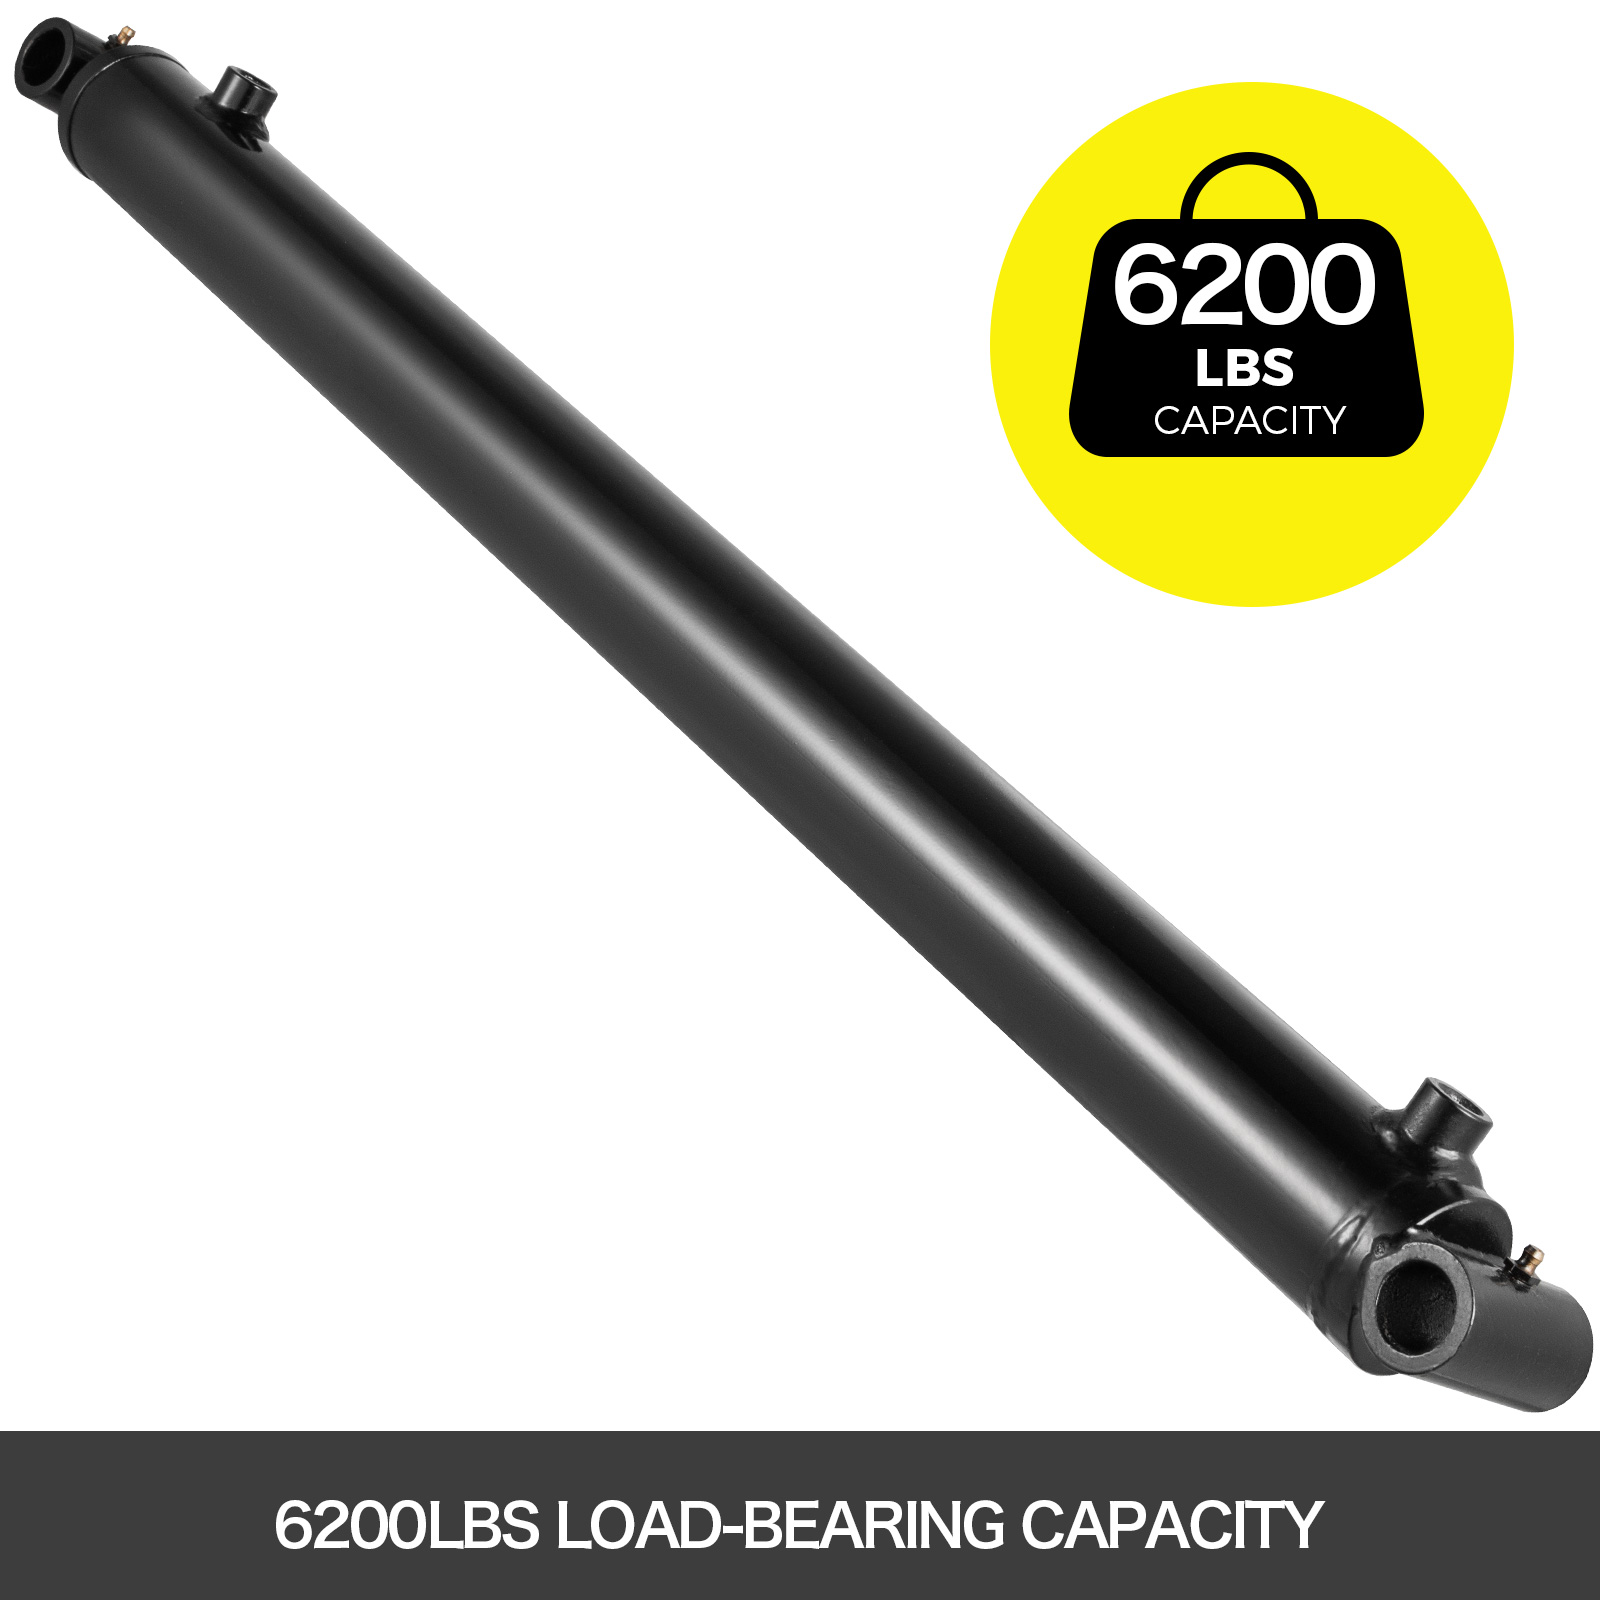 3 inch Bore x 48 inch stroke Hydraulic Cylinder 3000 PSI Welded Cylinder with Cross Tube Mounts